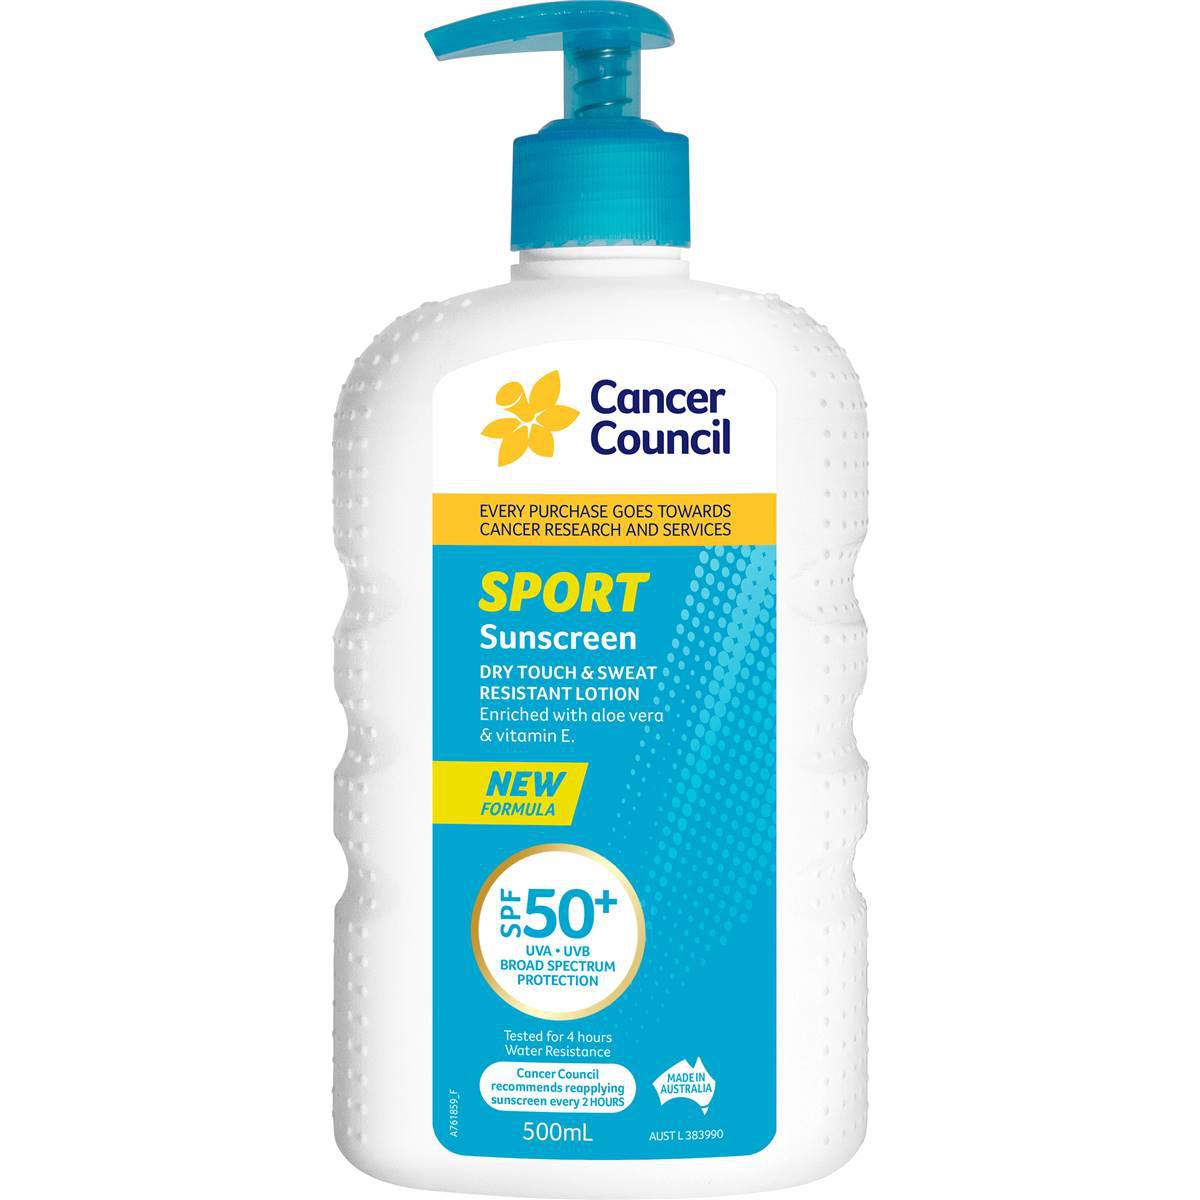 Cancer Council Sport Sunscreen Spf50+ Dry Touch & Sweat Resistant 500ml